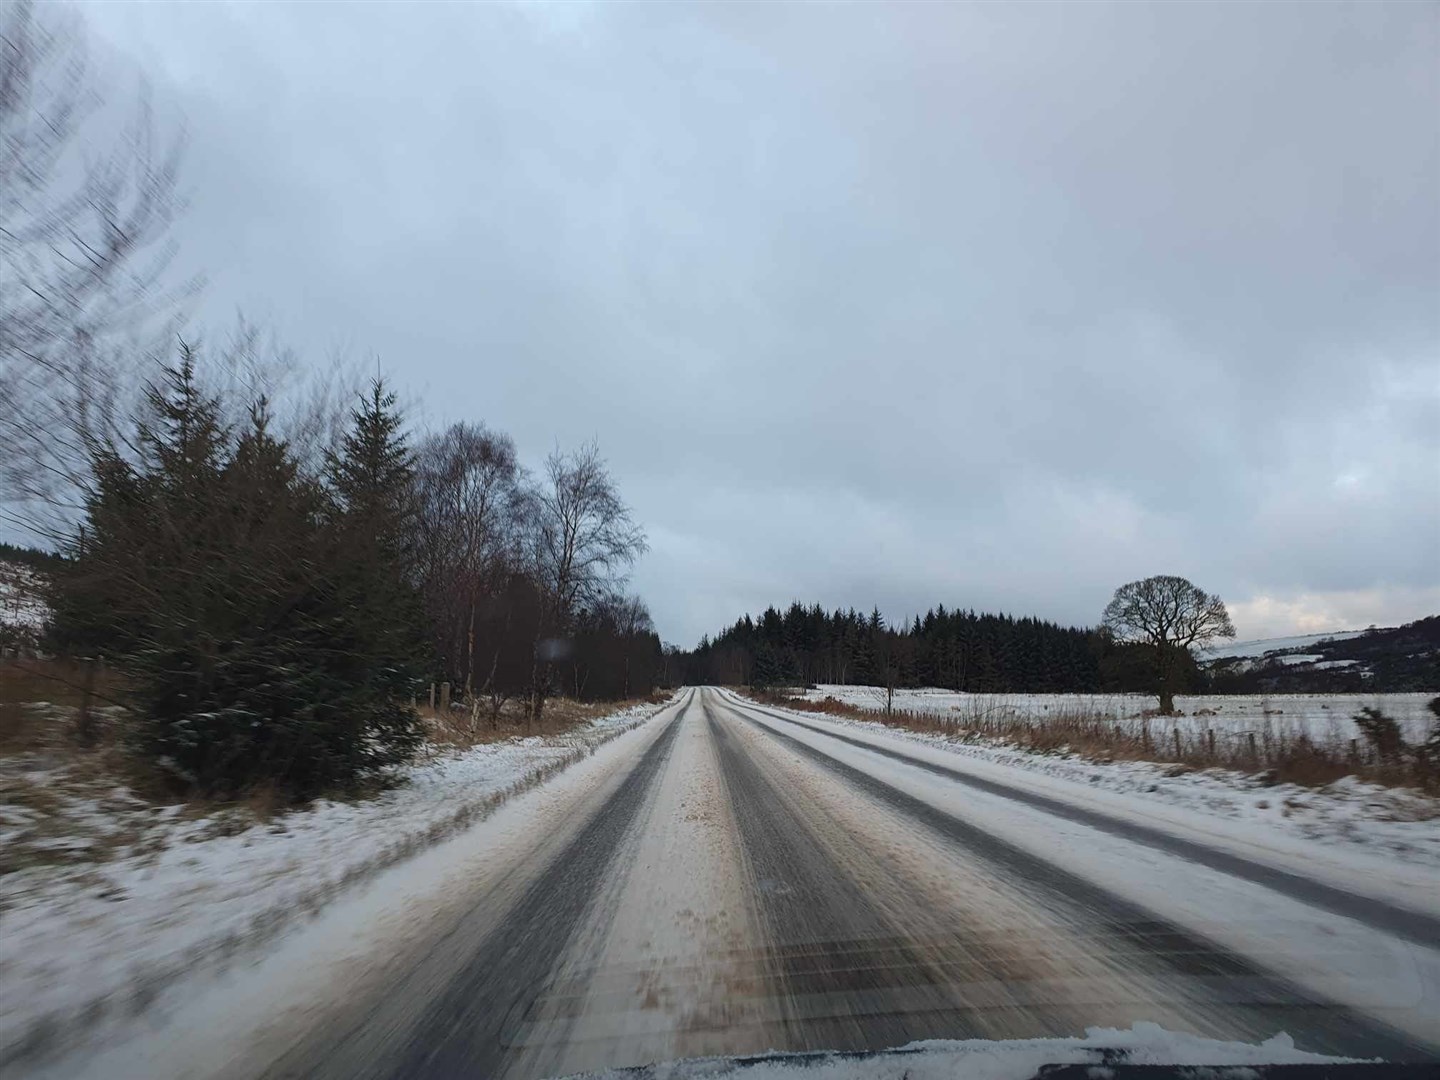 Another day of snow disruption in Moray.